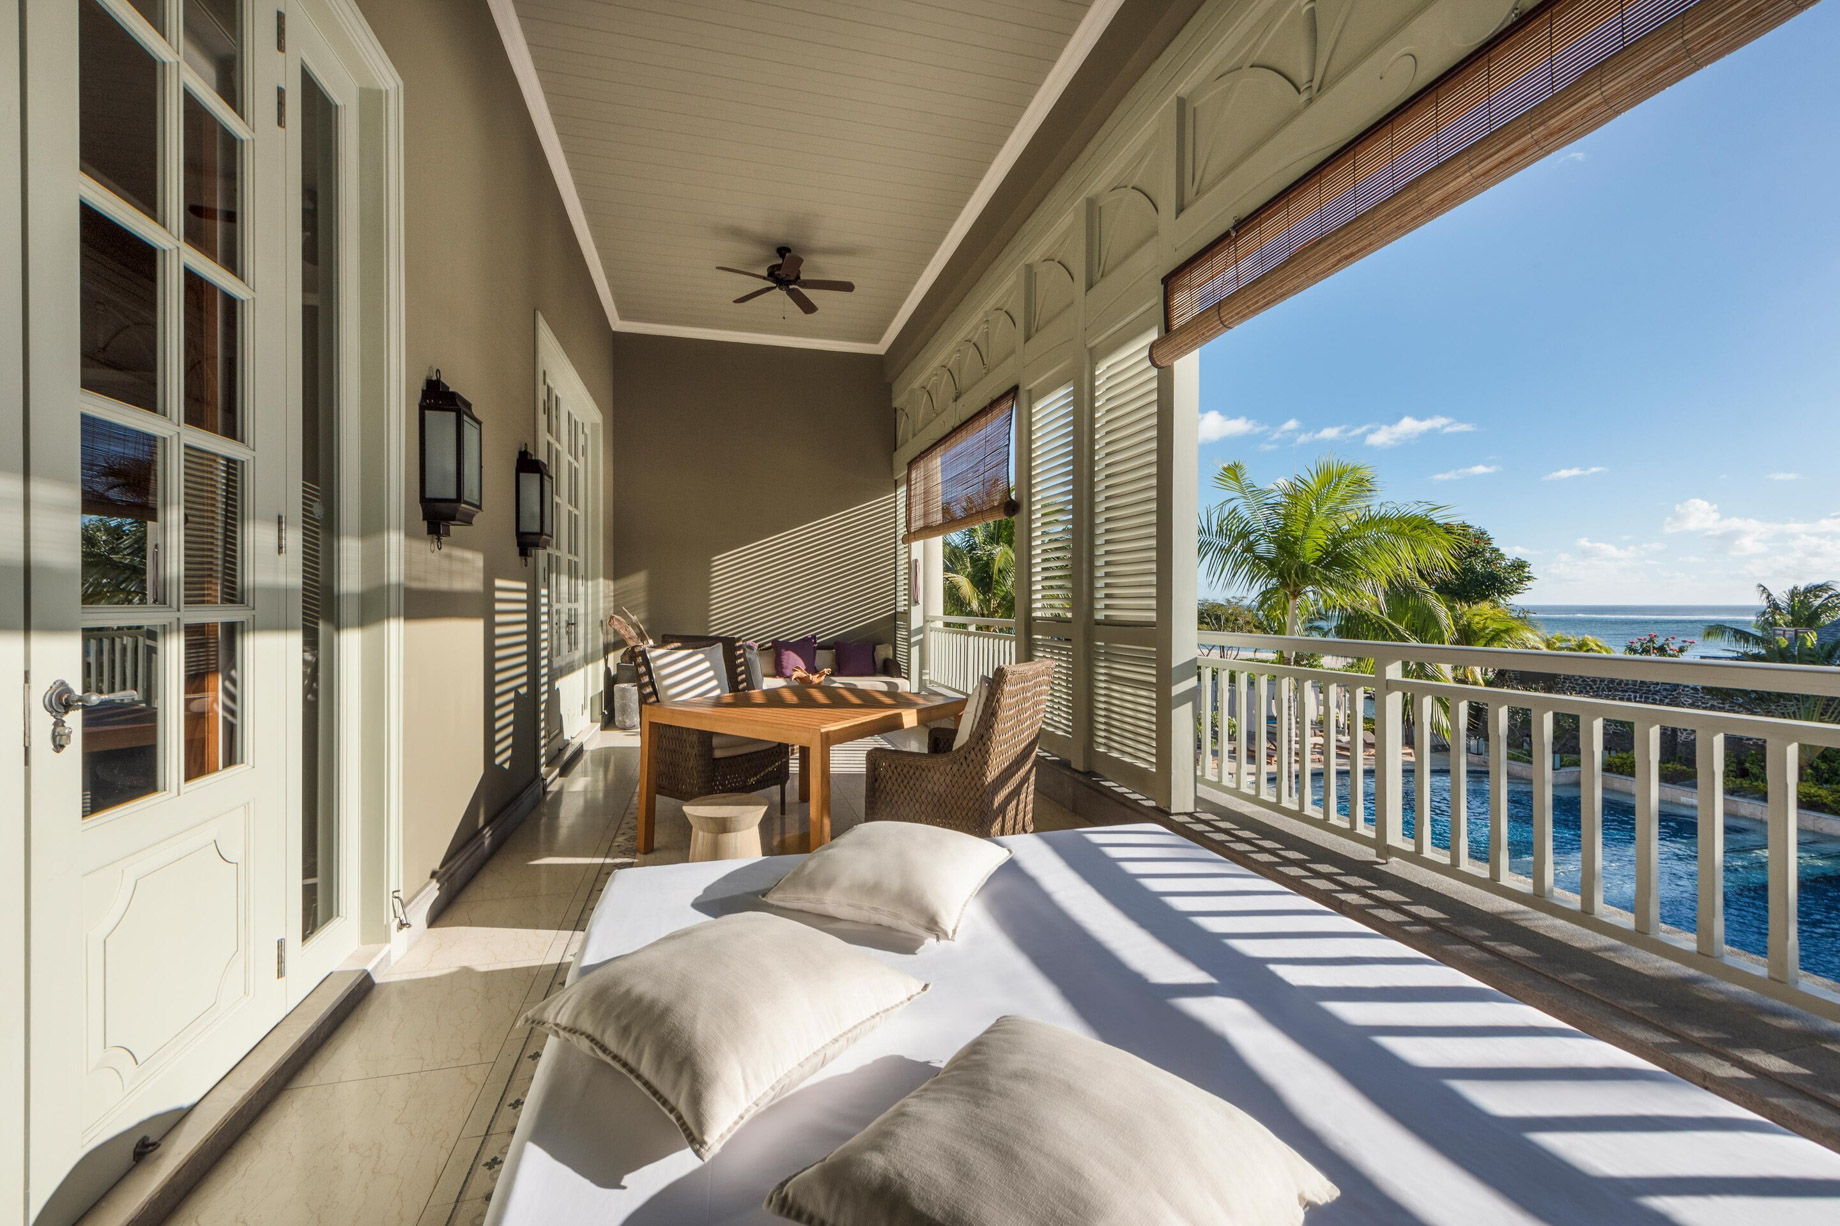 JW Marriott Mauritius Resort – Mauritius – Manor House Spa Suite Terrace Overlooking the Pool and Ocean